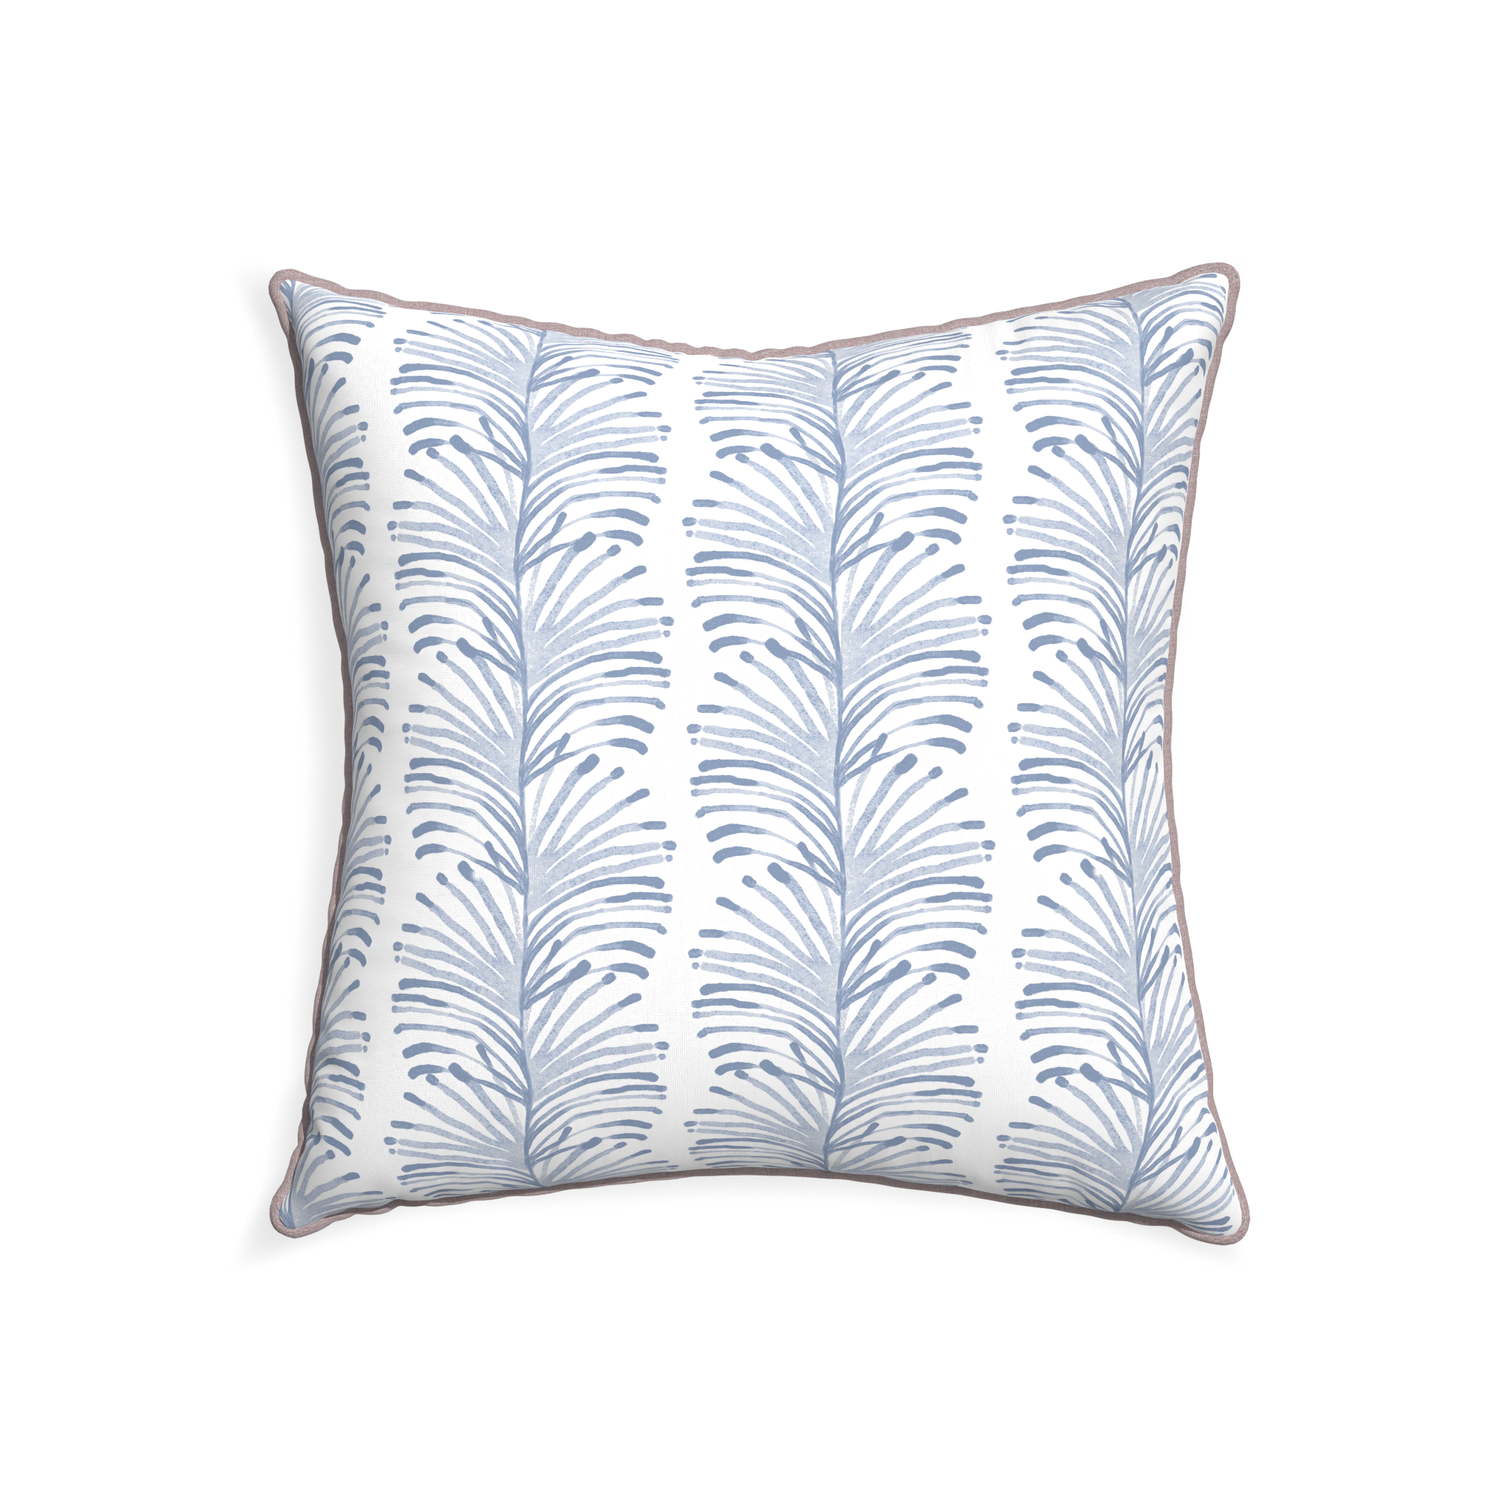 22-square emma sky custom sky blue botanical stripepillow with orchid piping on white background